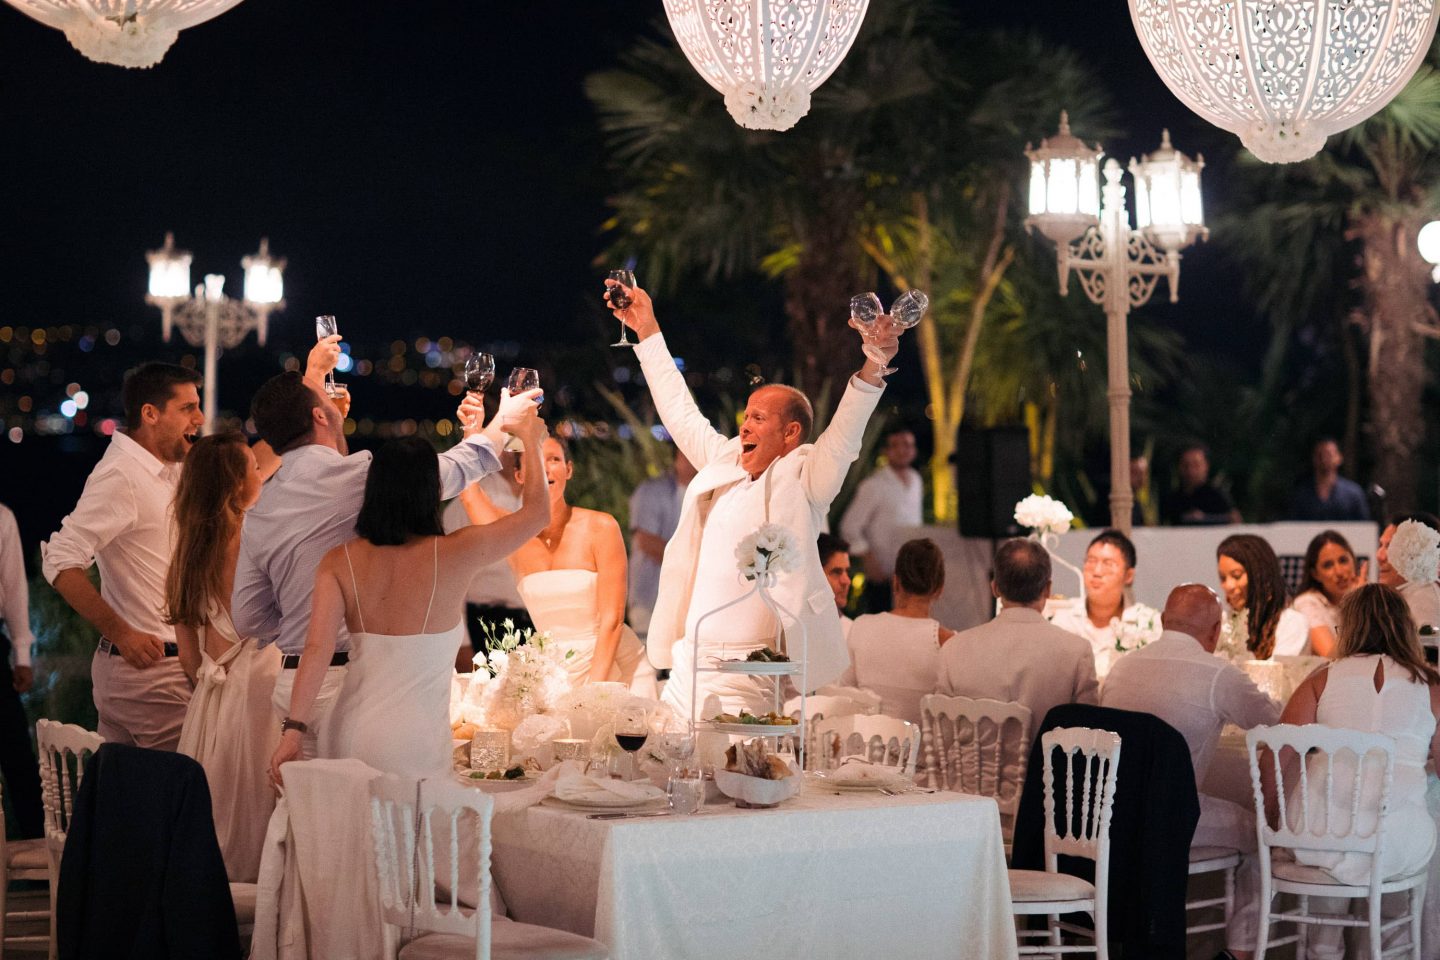 Guests during white party decor at this Istanbul wedding weekend at Four Seasons Bosphorus | Photo by Allan Zepeda